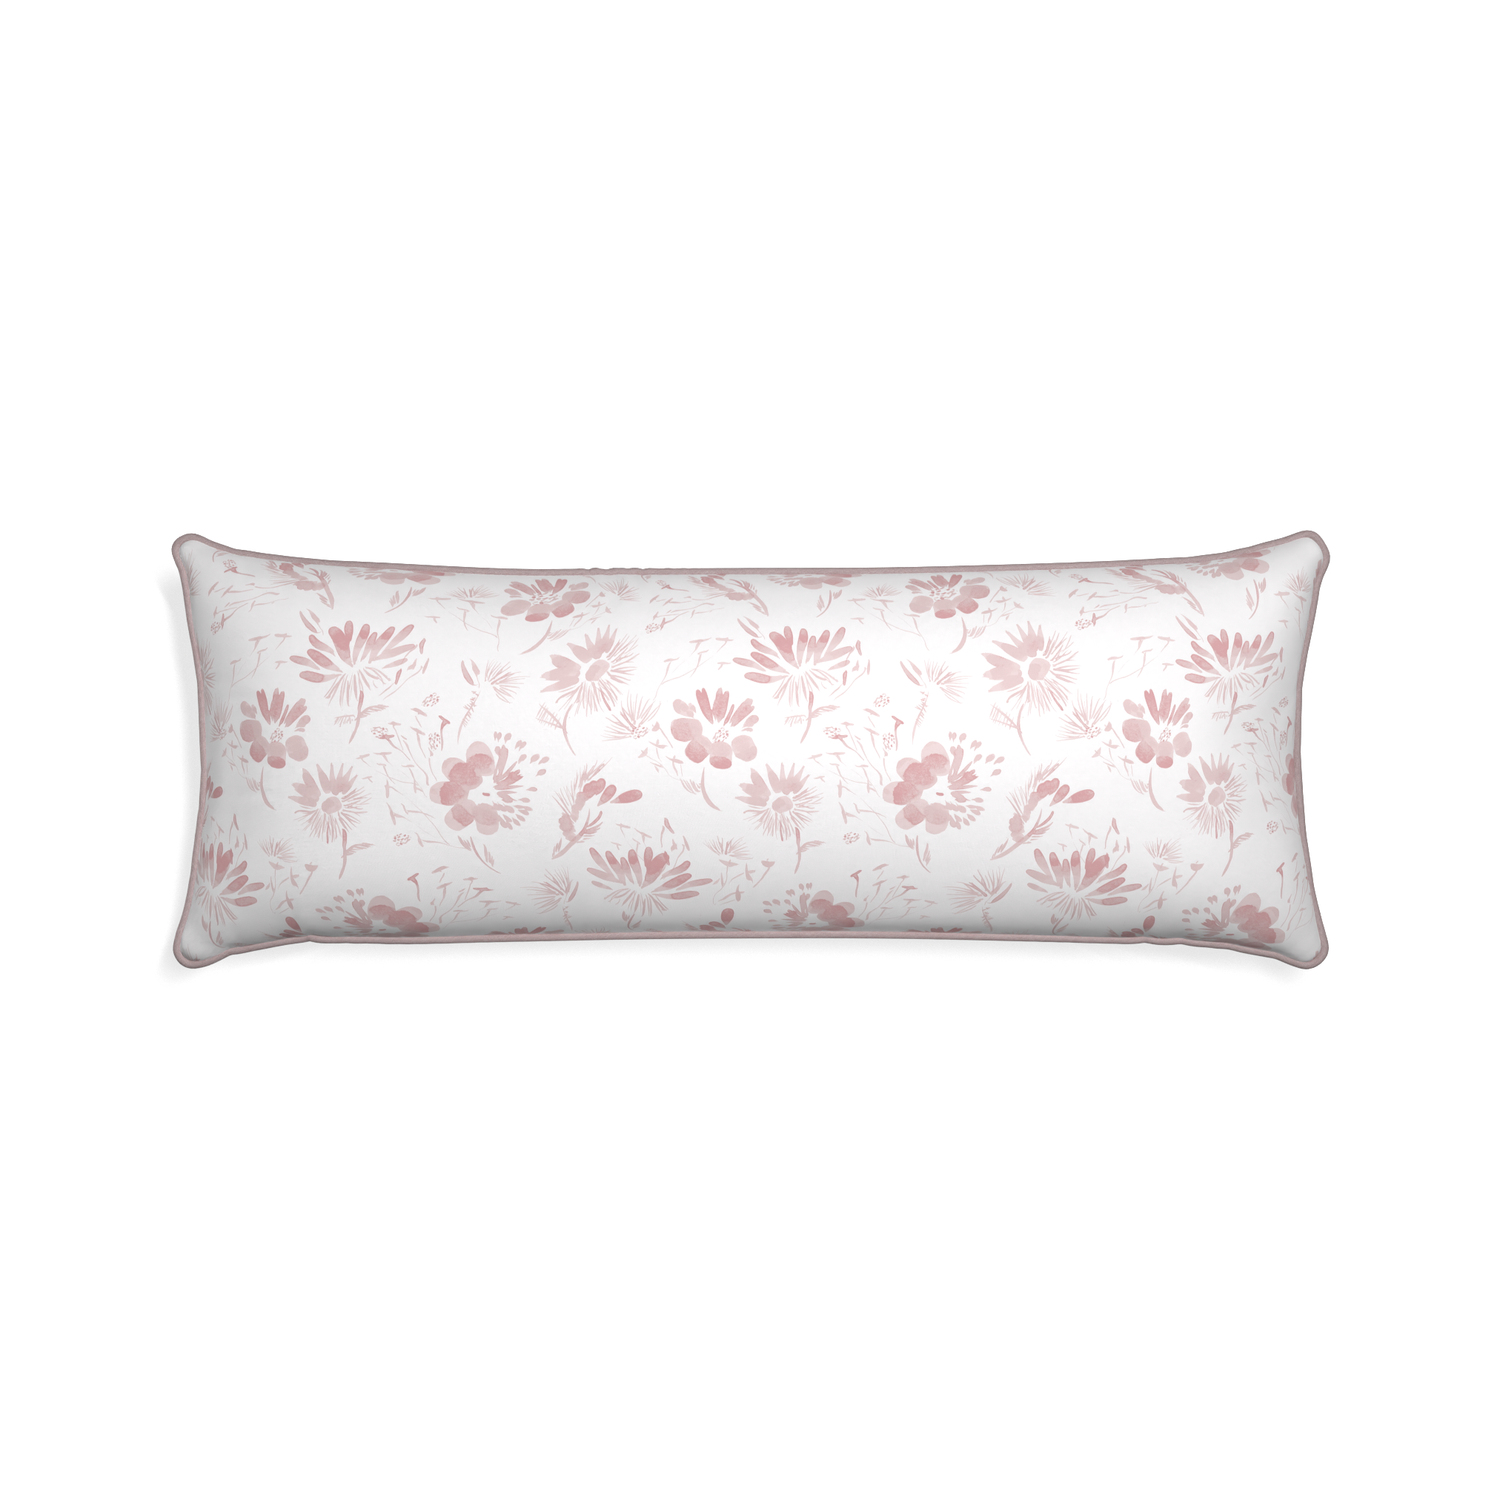 Xl-lumbar blake custom pink floralpillow with orchid piping on white background